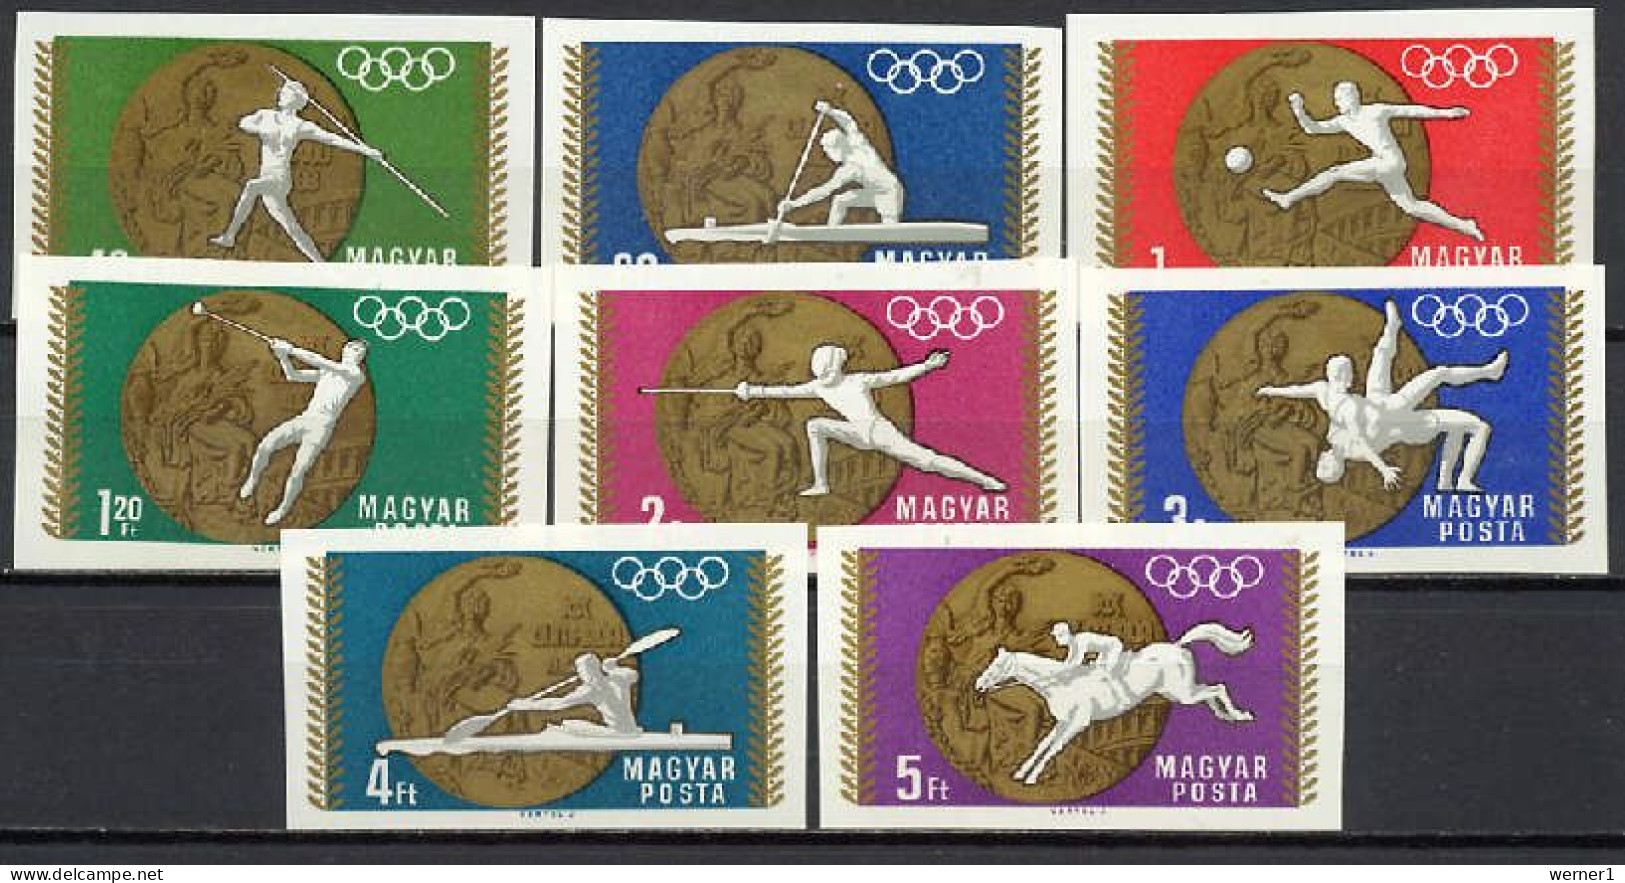 Hungary 1969 Olympic Games Mexico, Football Soccer, Athletics, Equestrian, Wrestling, Fencing Etc. Set Of 8 Imperf. MNH - Summer 1968: Mexico City